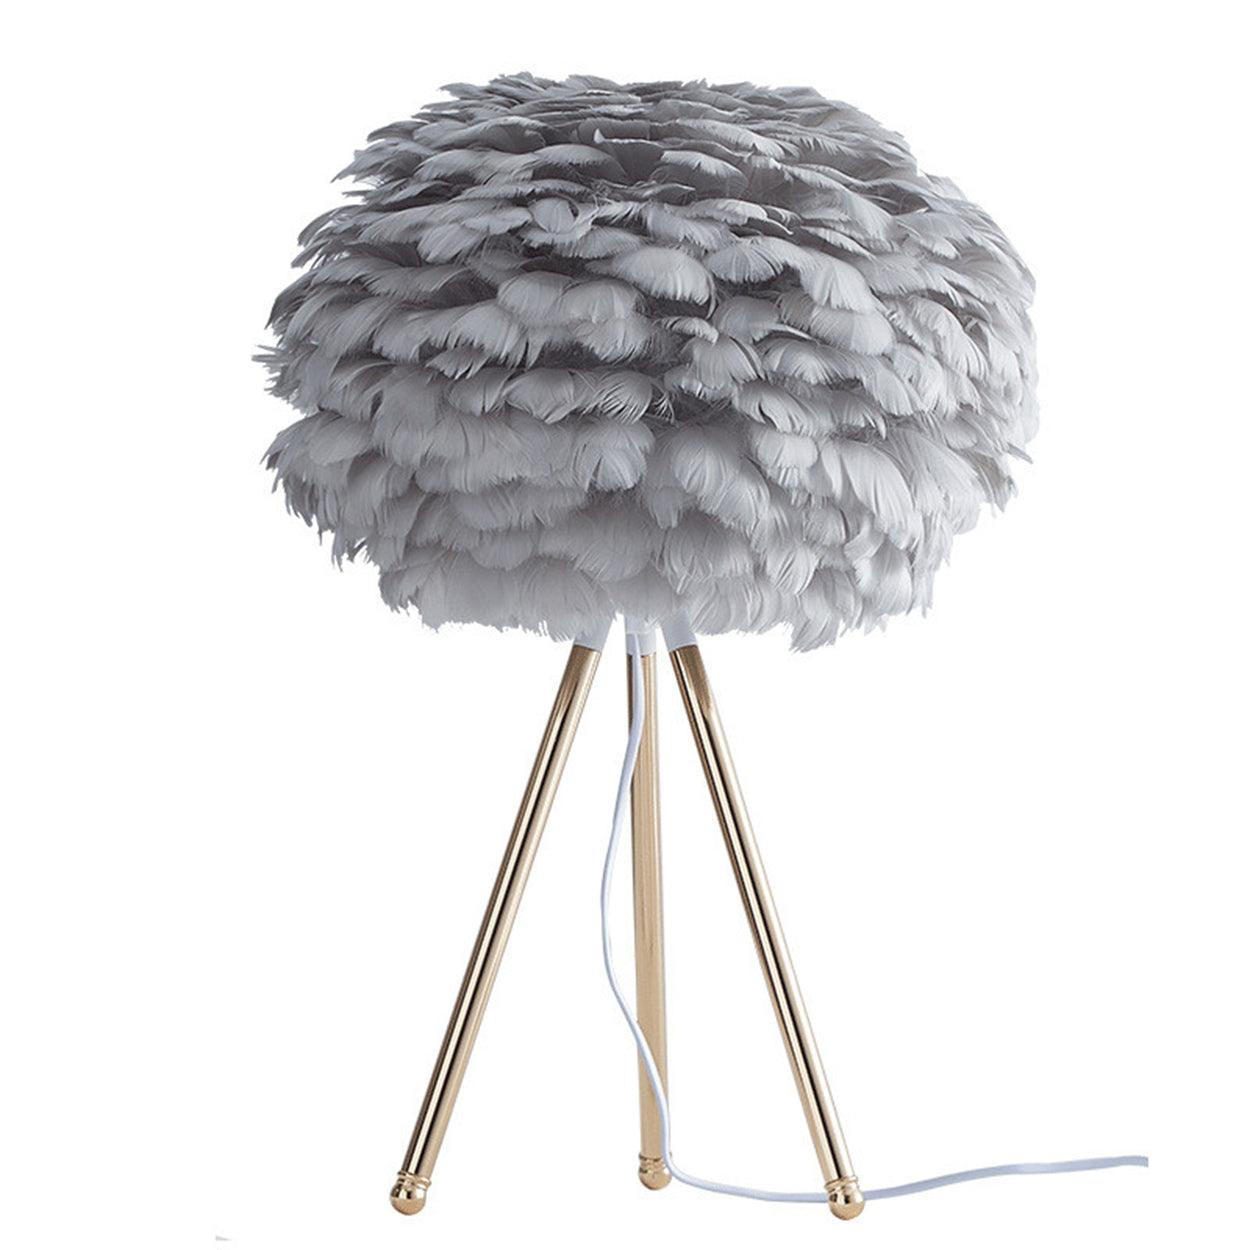 GOOSE FEATHER TABLE LAMP BEDSIDE LAMP - Ankur Lighting